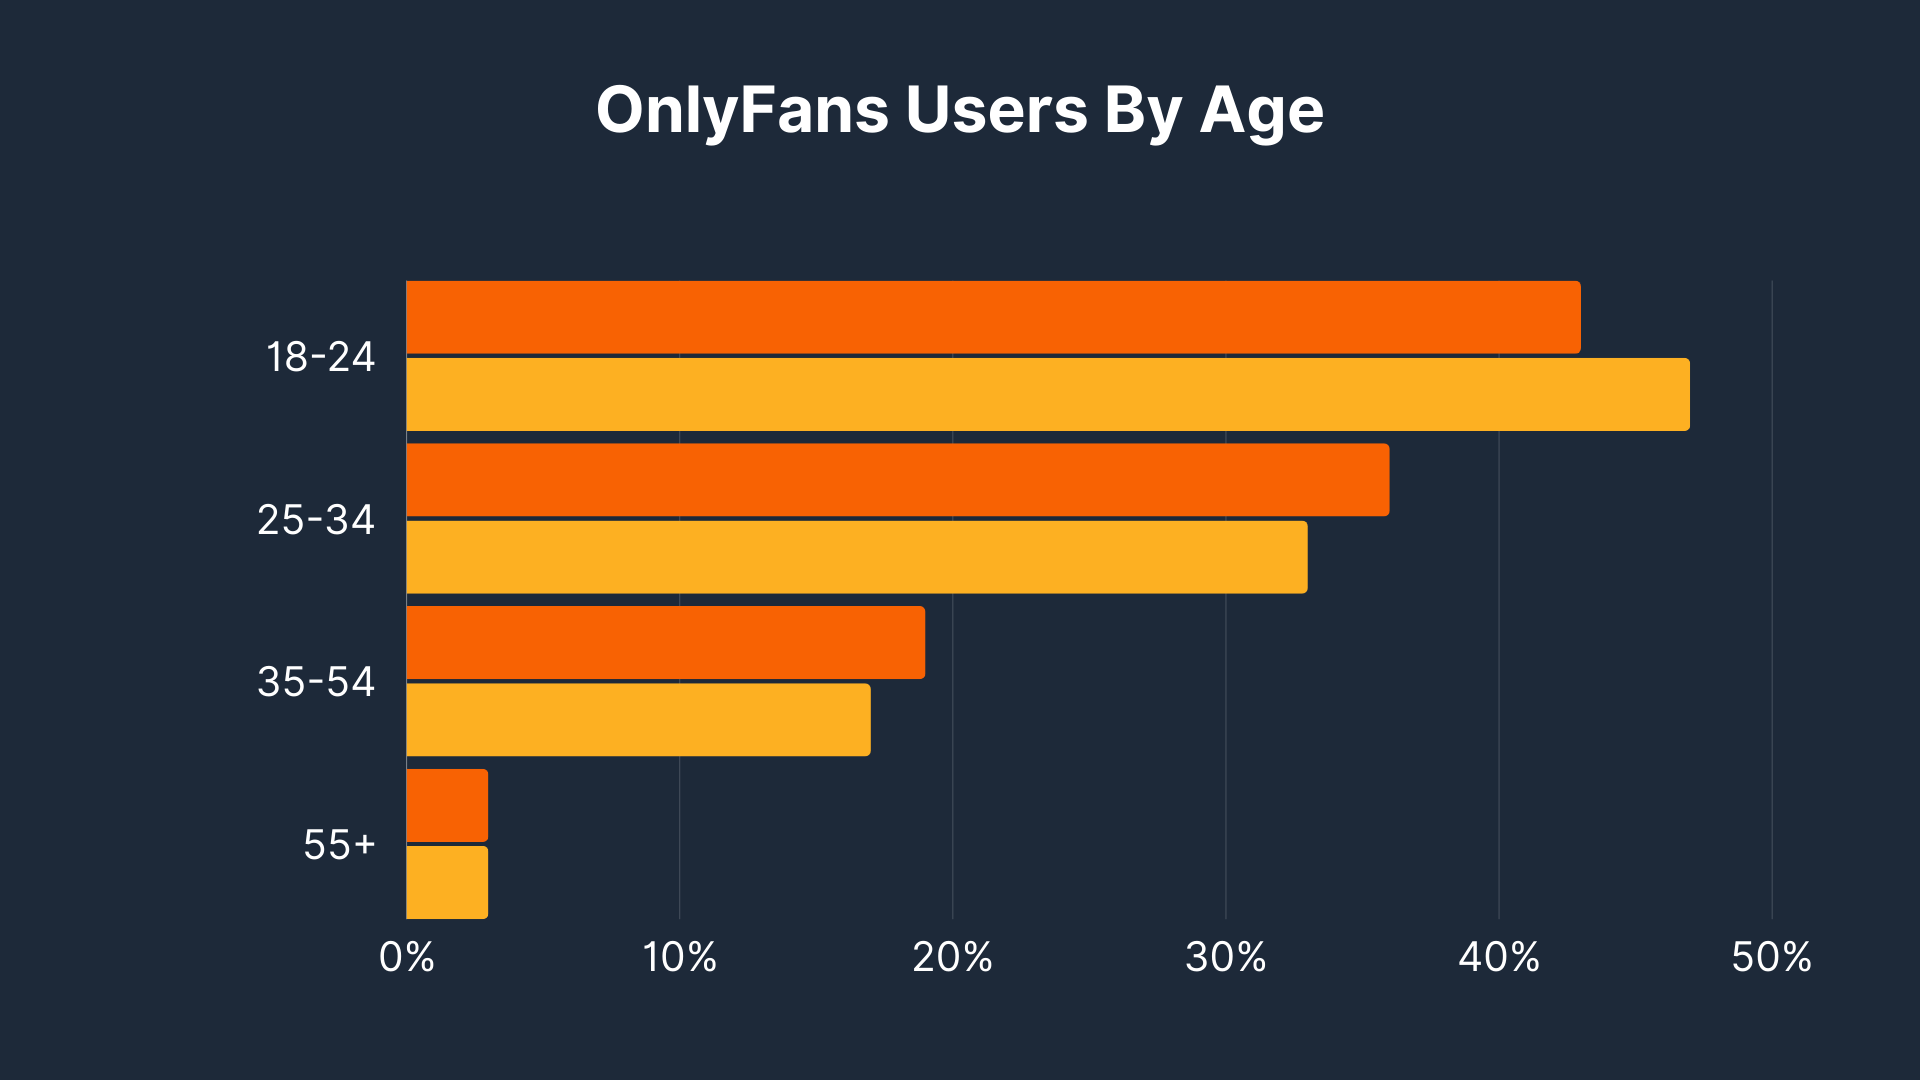 OnlyFans users by age